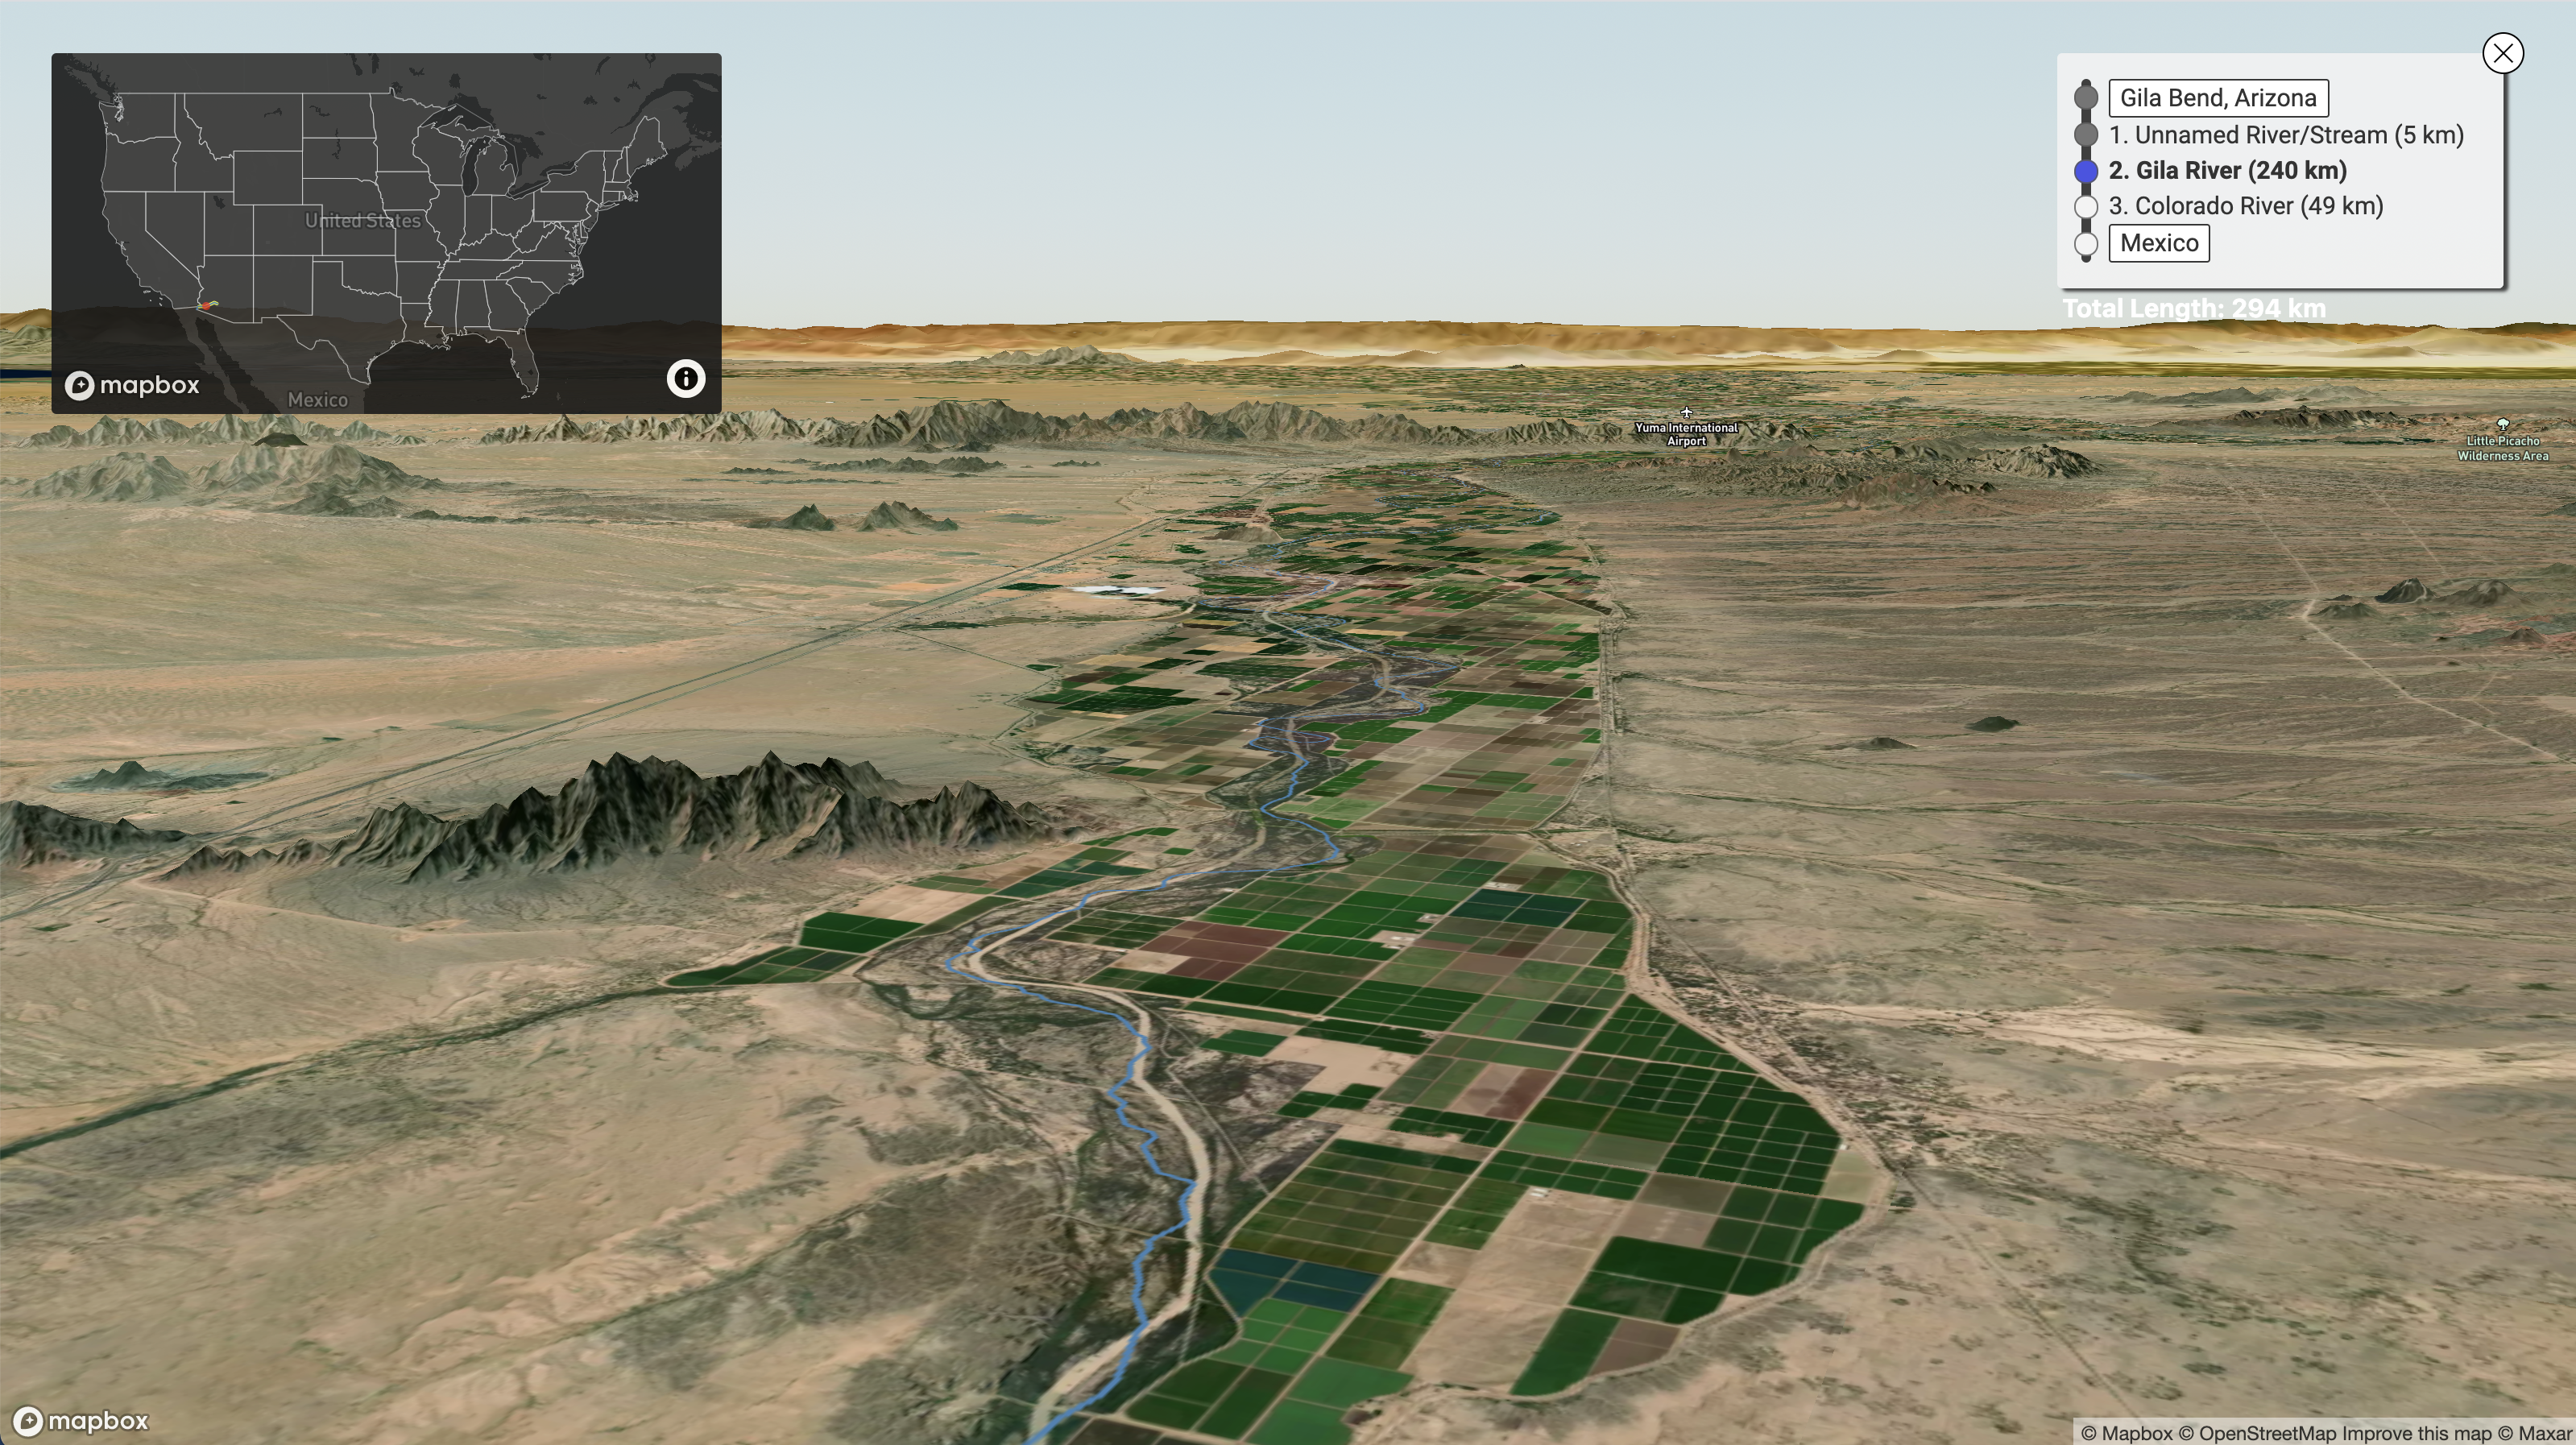 Screenshot of the river runner in progress from Southwest Arizona to Mexican border. Mountain features, desert, and river are visible.